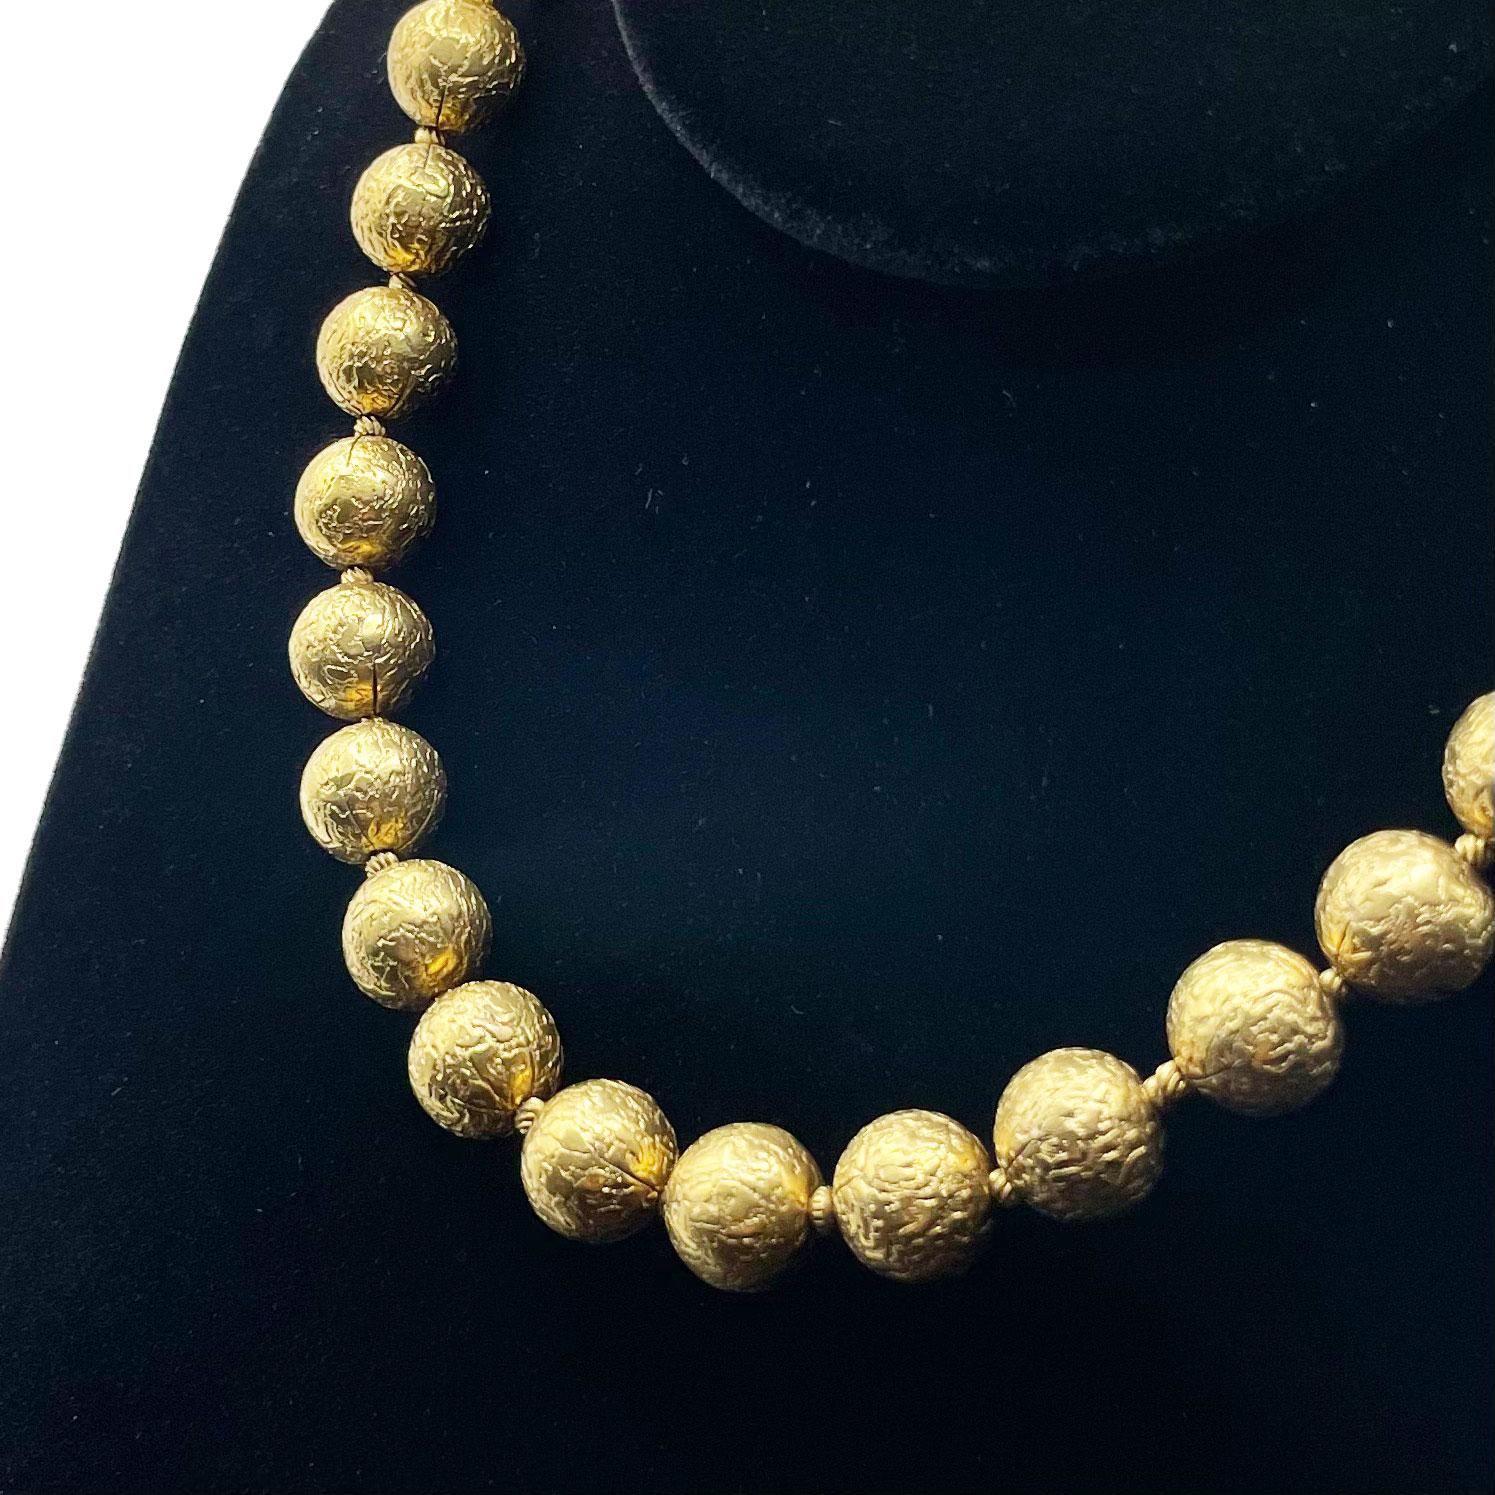 Gold tone beaded necklace